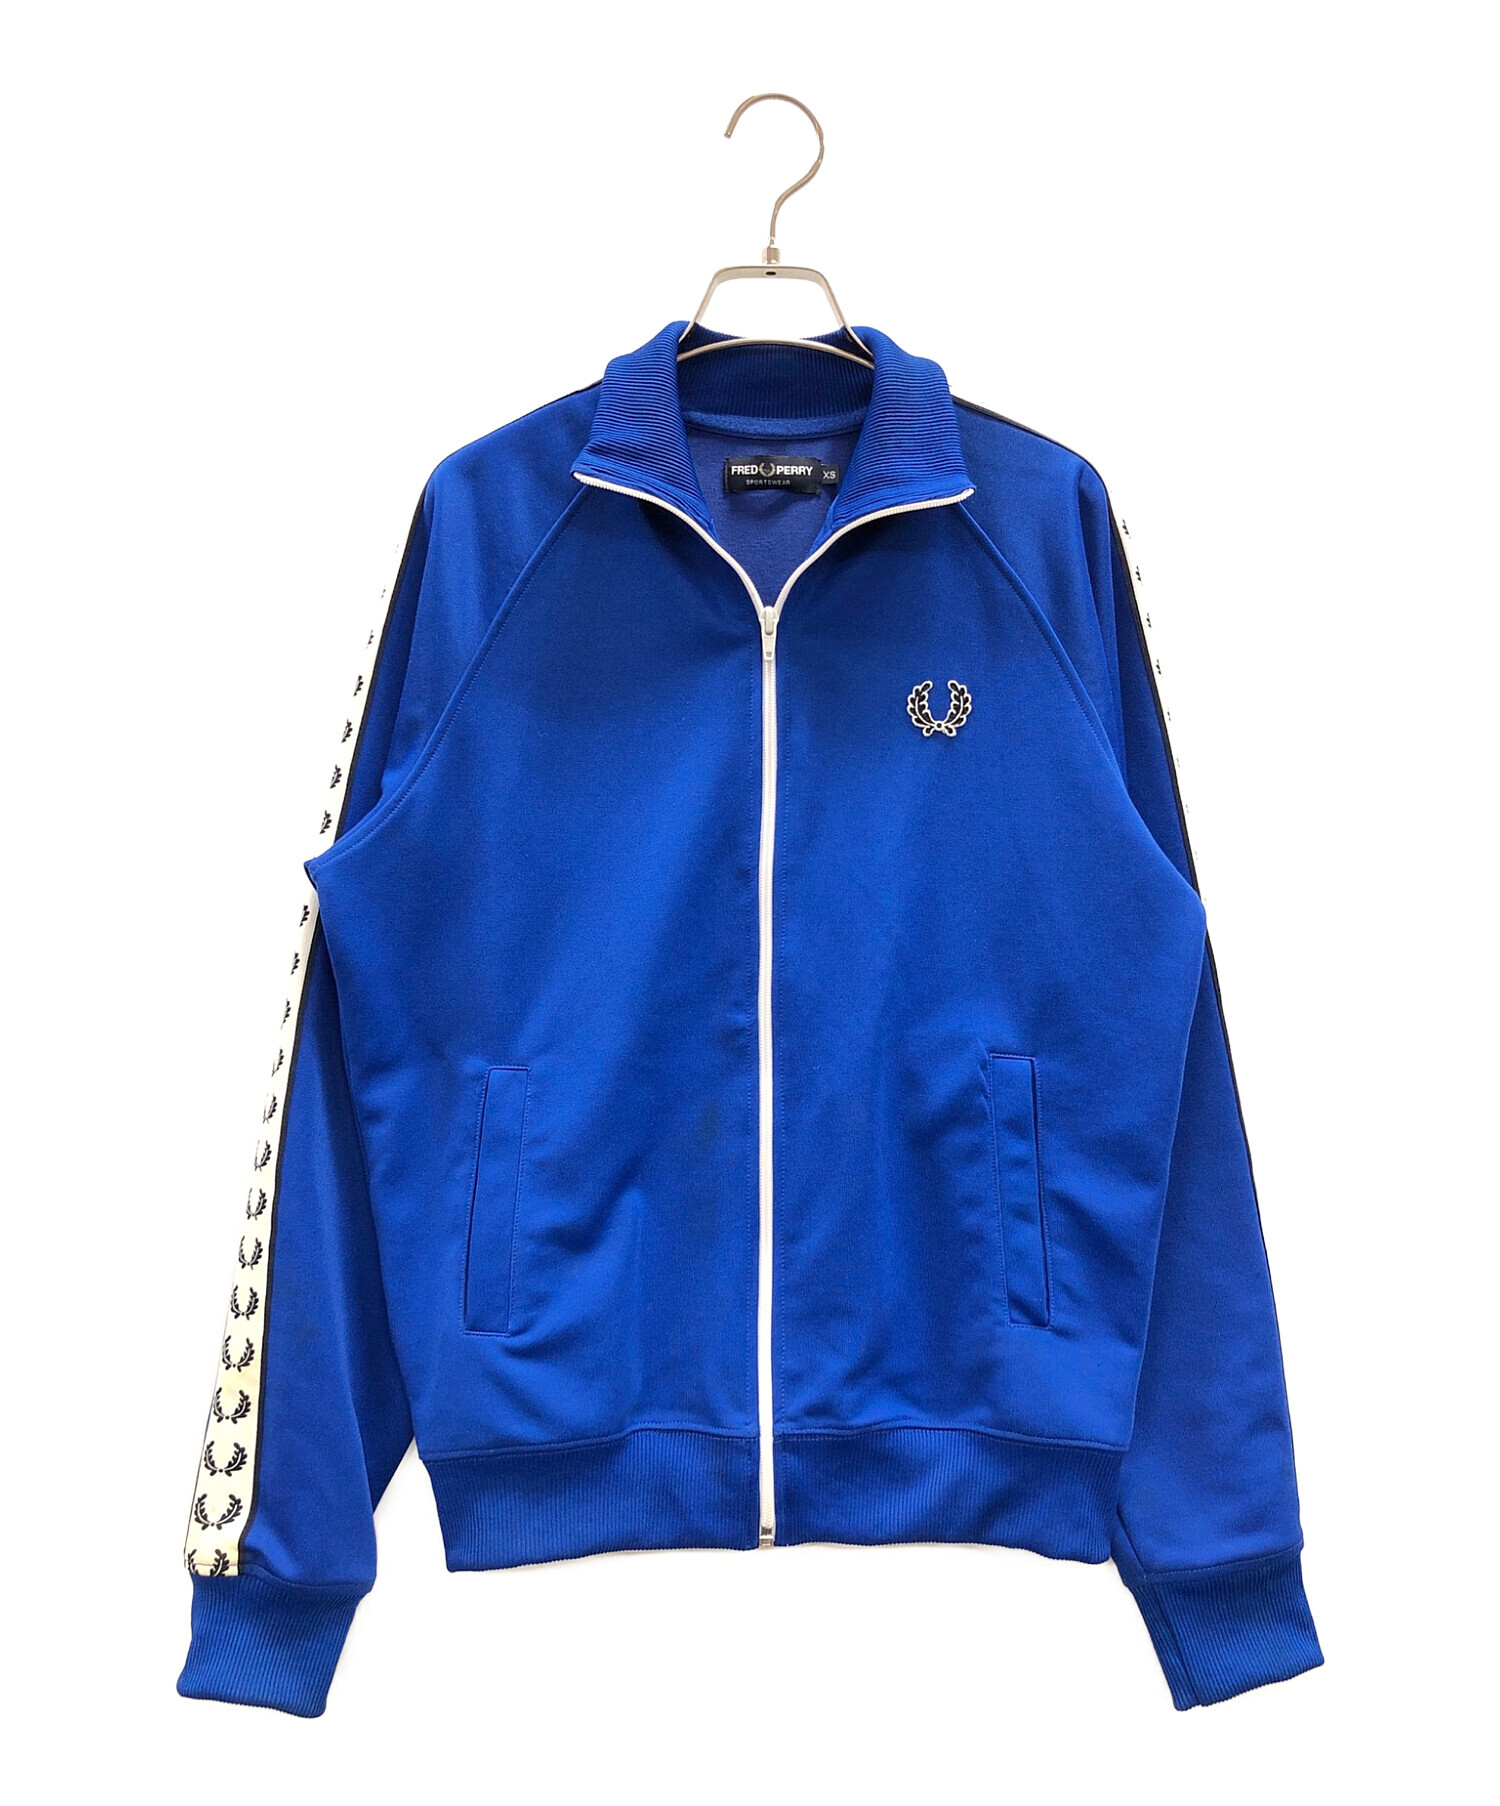 FRED PERRY ジャージ made inポルトガル